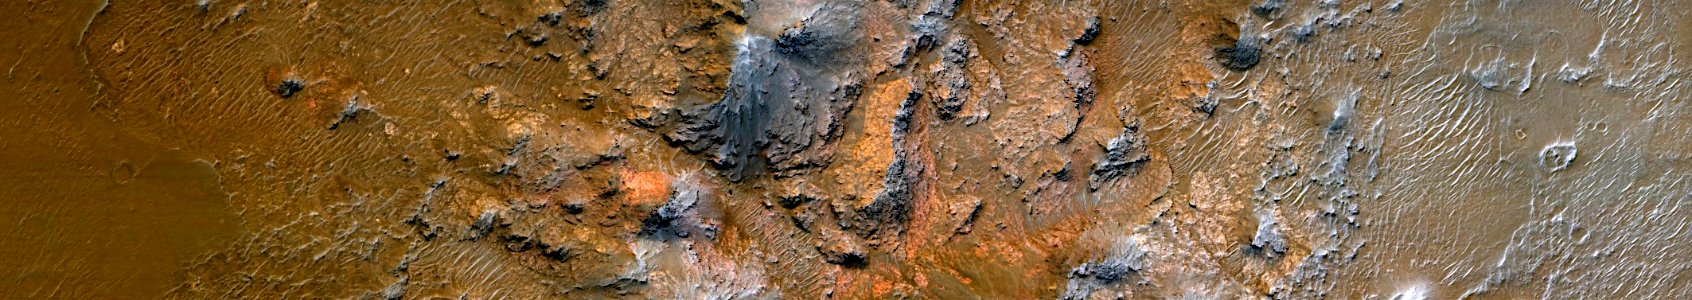 Mars - Central Peak of Taxco Crater